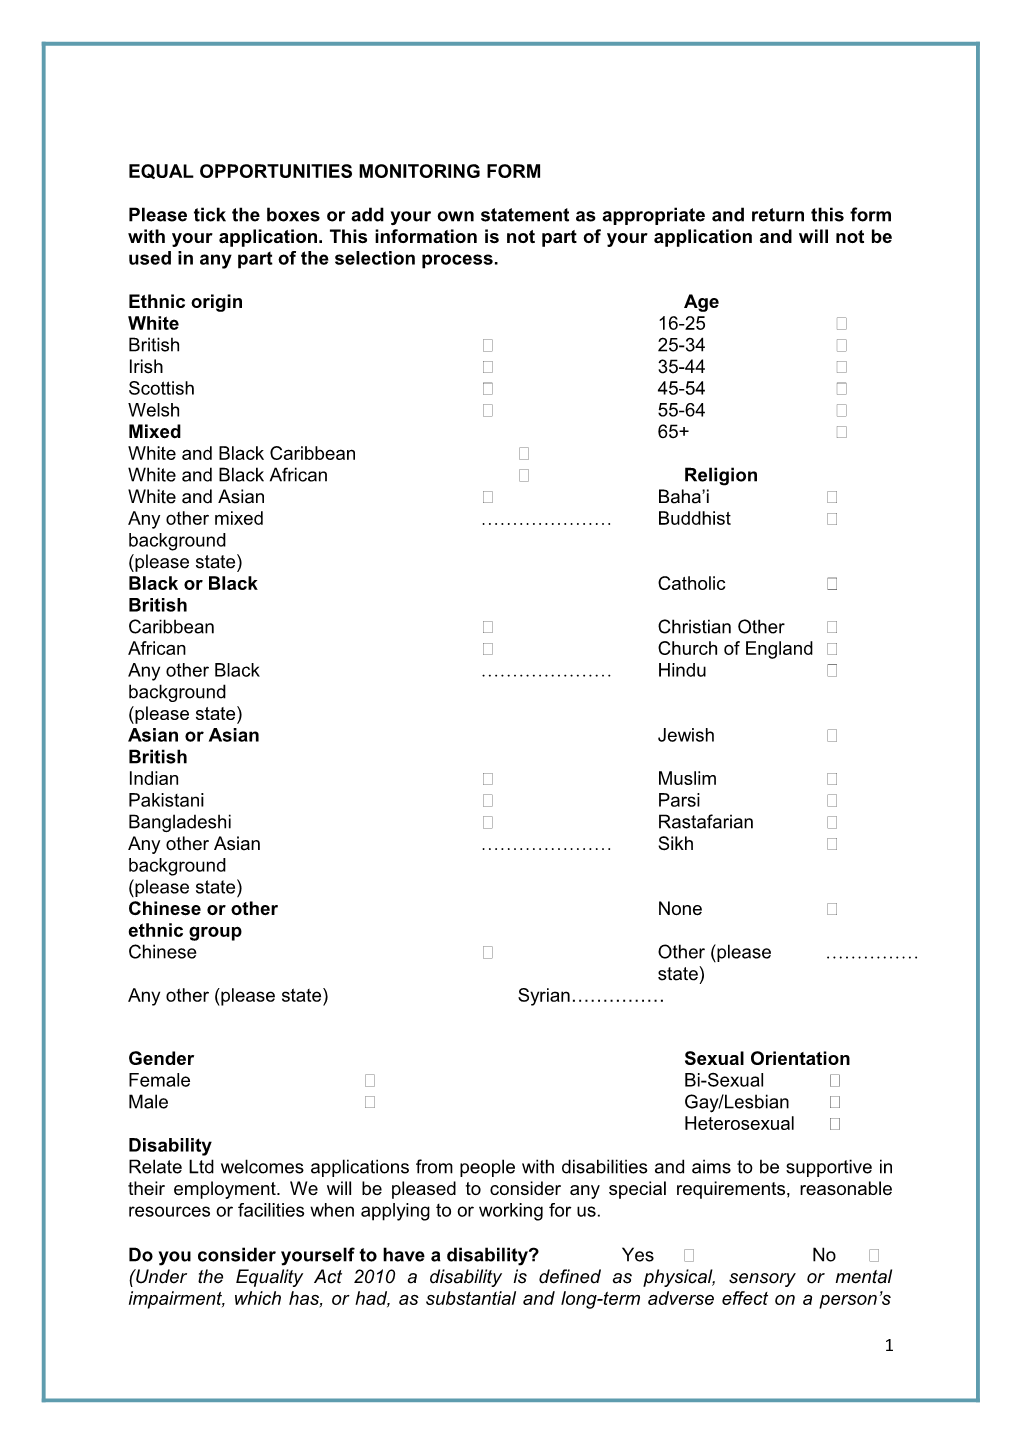 Equal Opportunities Monitoring Form s6